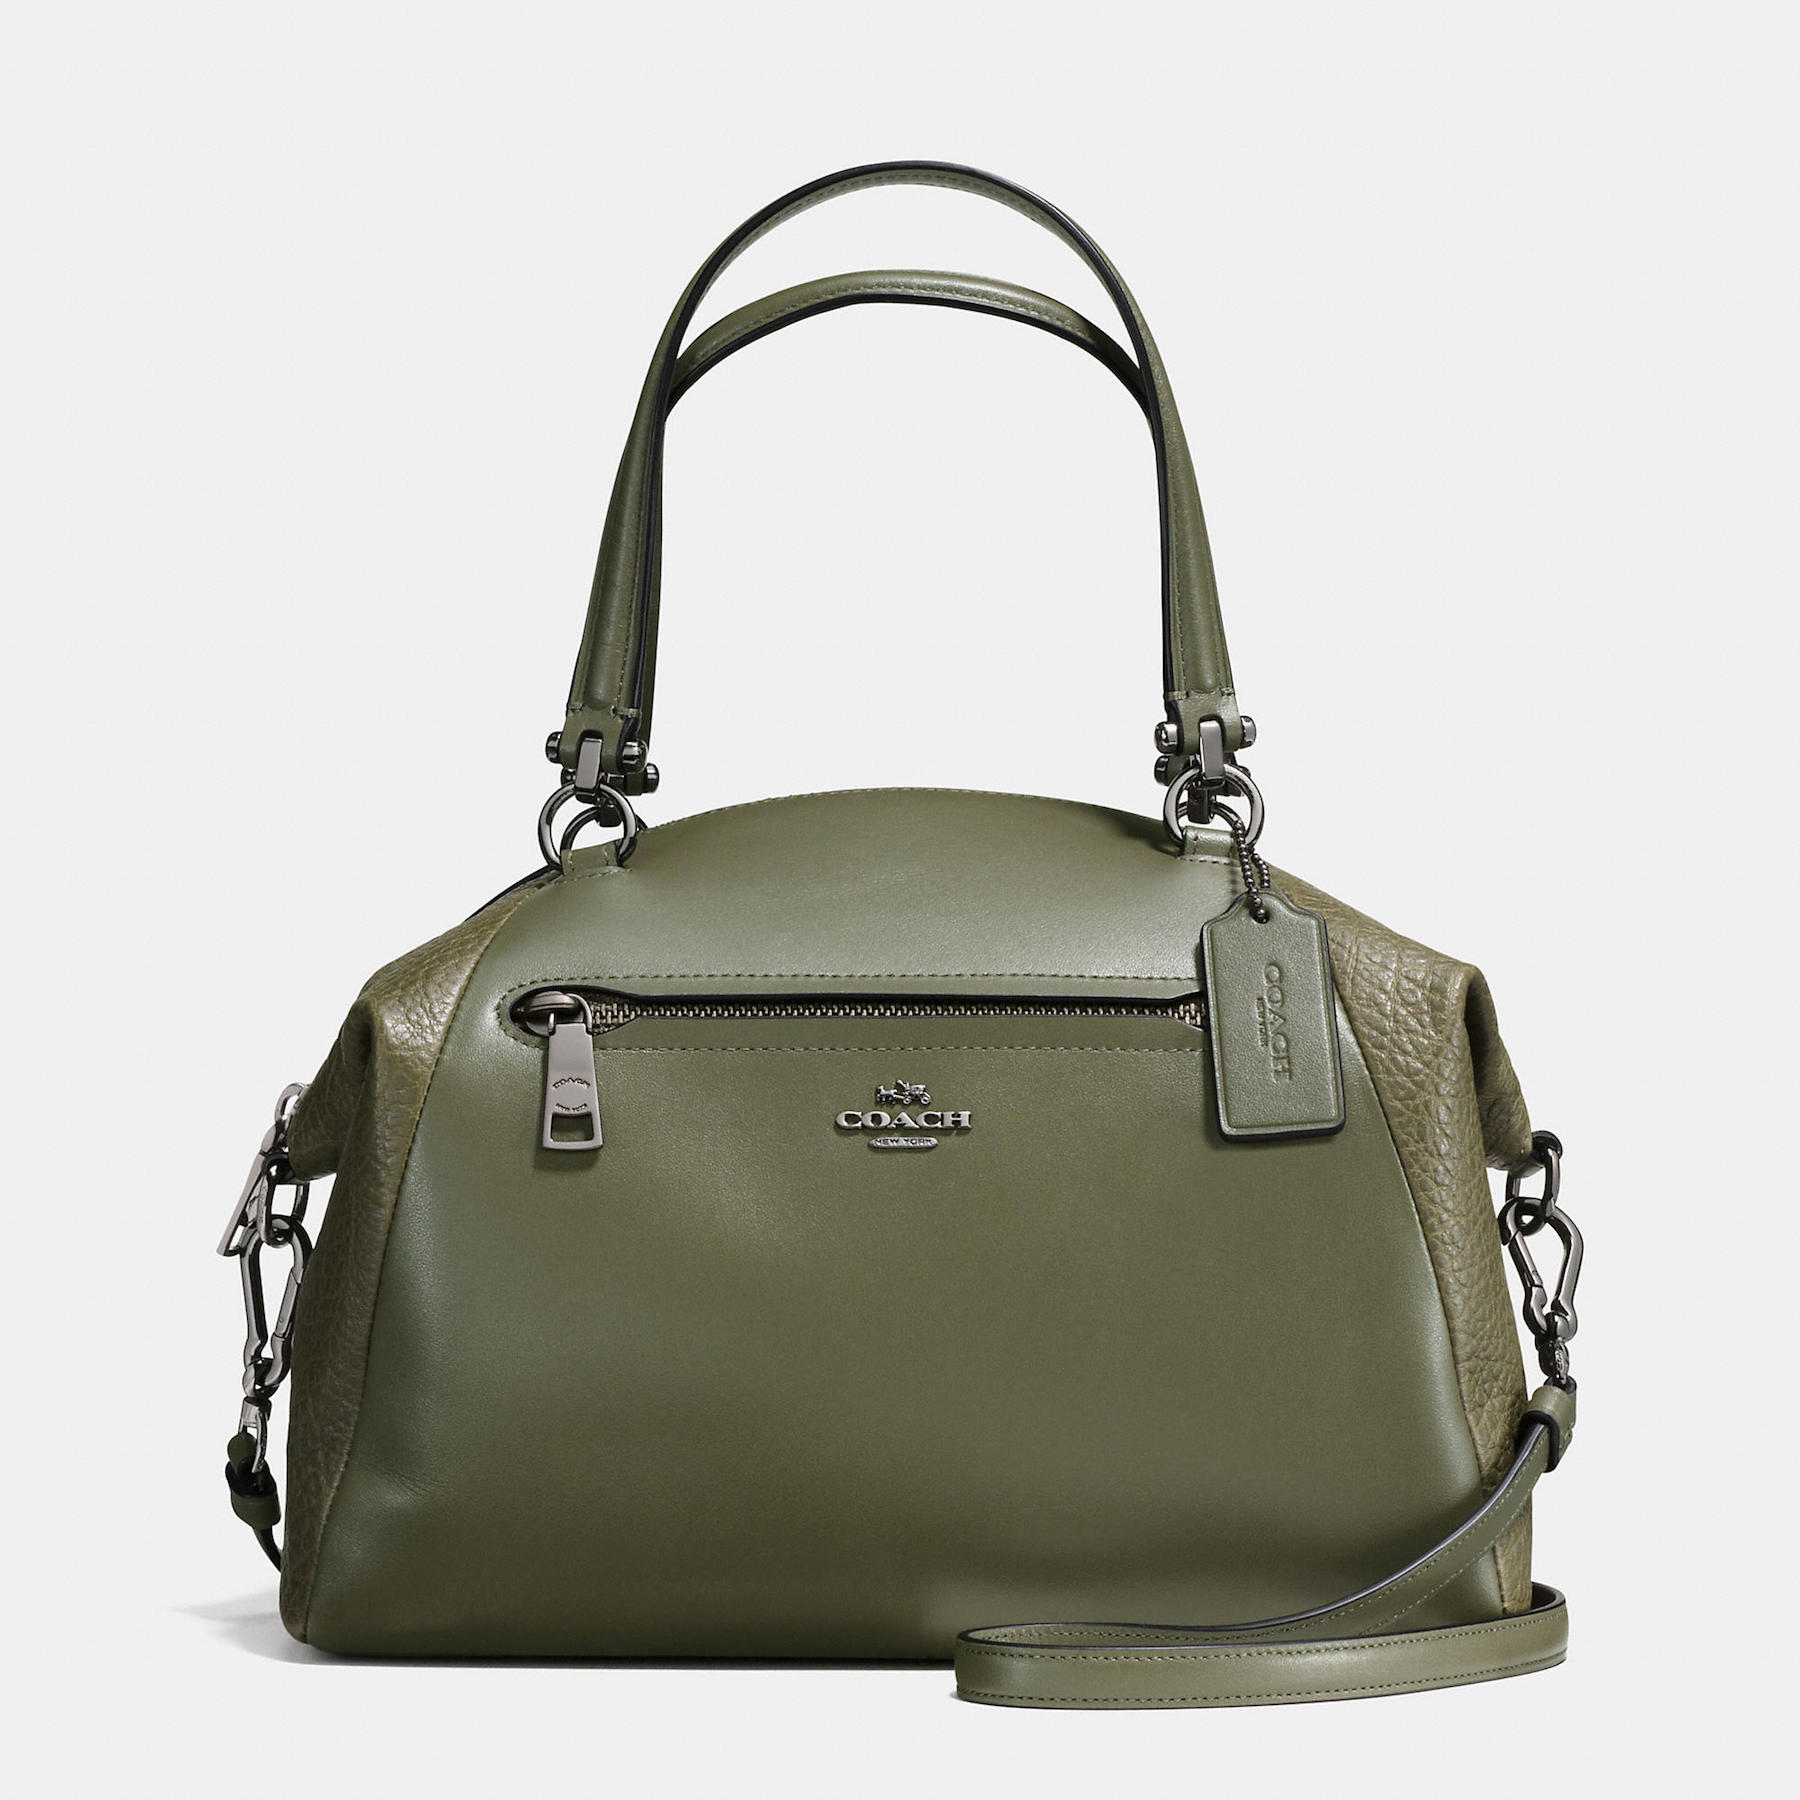 Coach PRAIRIE satchel in mixed leathers gunmetal and green surplus